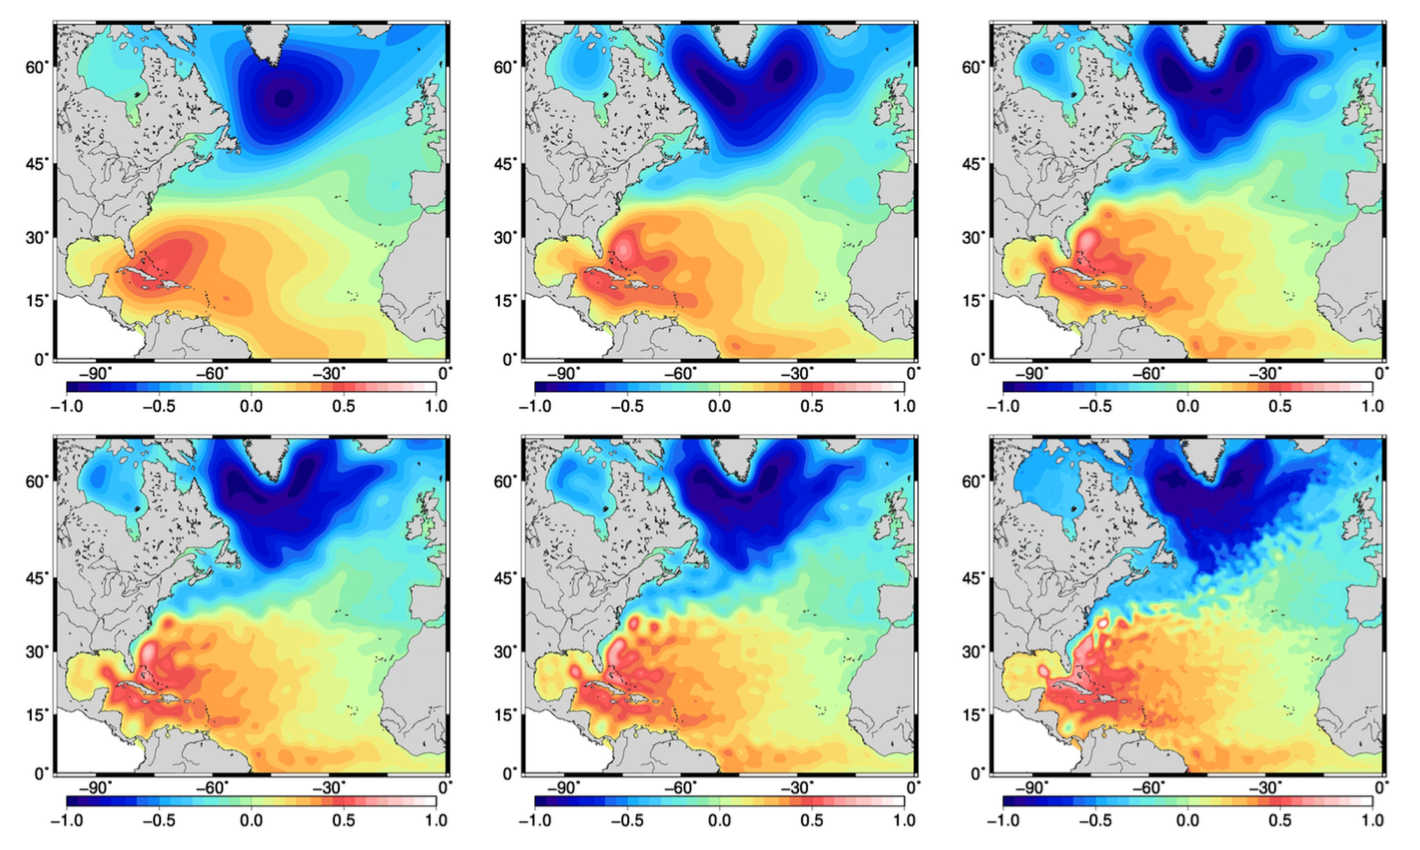 Different scales in the North Atlantic